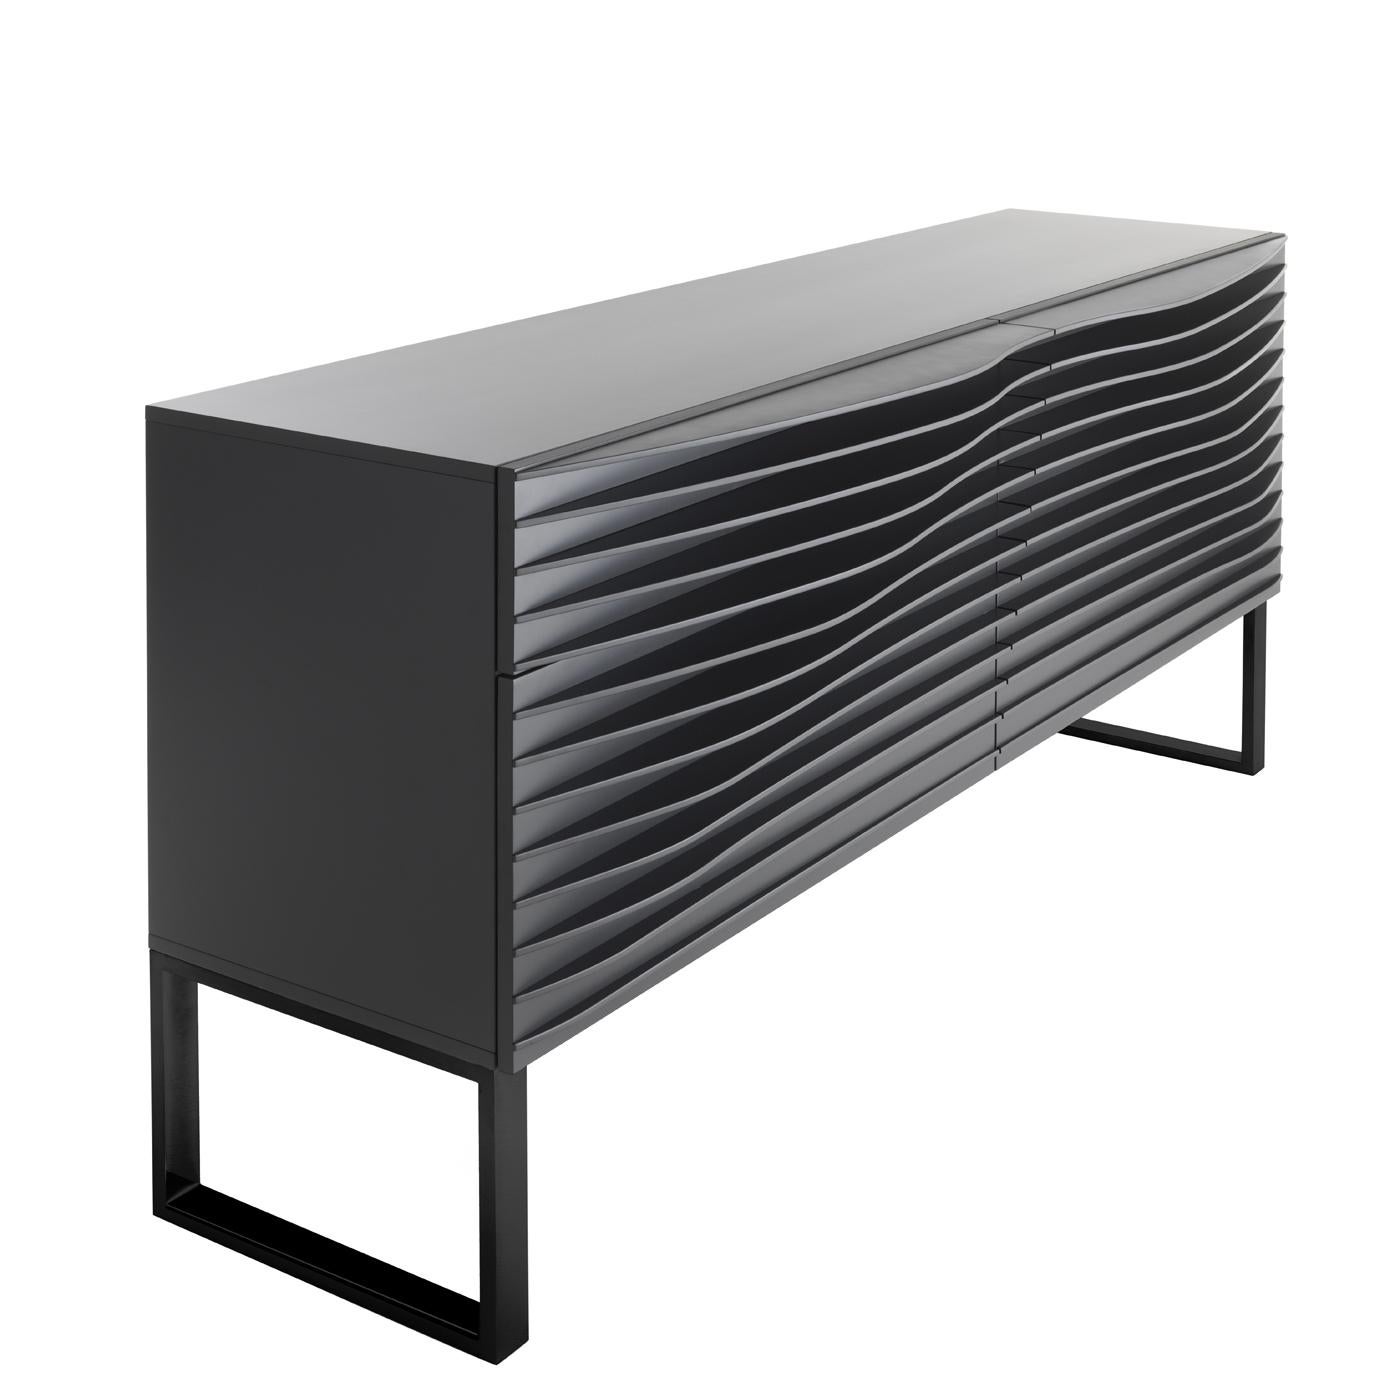 This sideboard by Karim Rashid exquisitely reflects the dynamic and modern functional style of the designer. Boasting a truly eye-catching silhouette, the four drawers have unique front panels made of evenly-spaced, horizontal thin sheets of MDF.